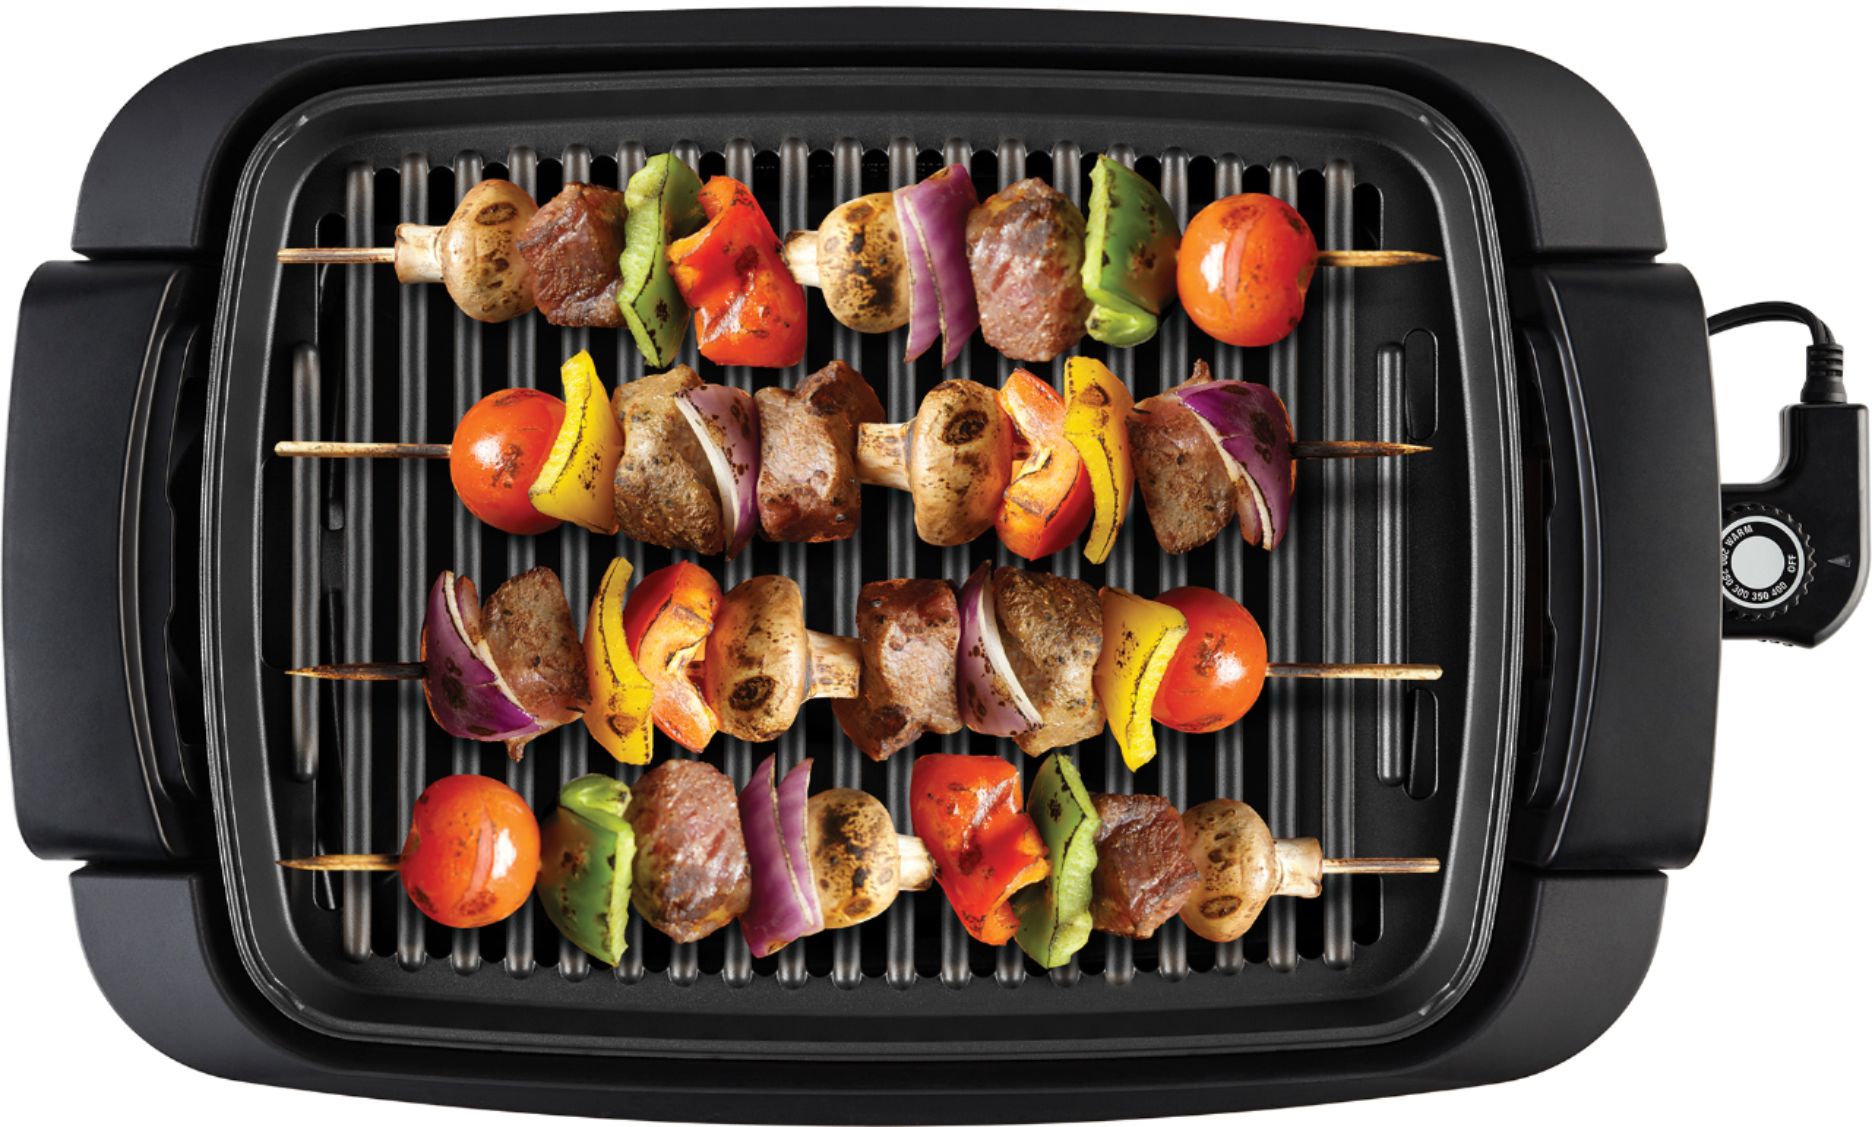 Cusimax Smokeless Indoor Grill Portable Electric Grill With Turbo Smoke  Extractor Technology, Nonstick Removable Grill Pan, Glass Lid, 1500 Watts,  Great For Home And BBQ Party